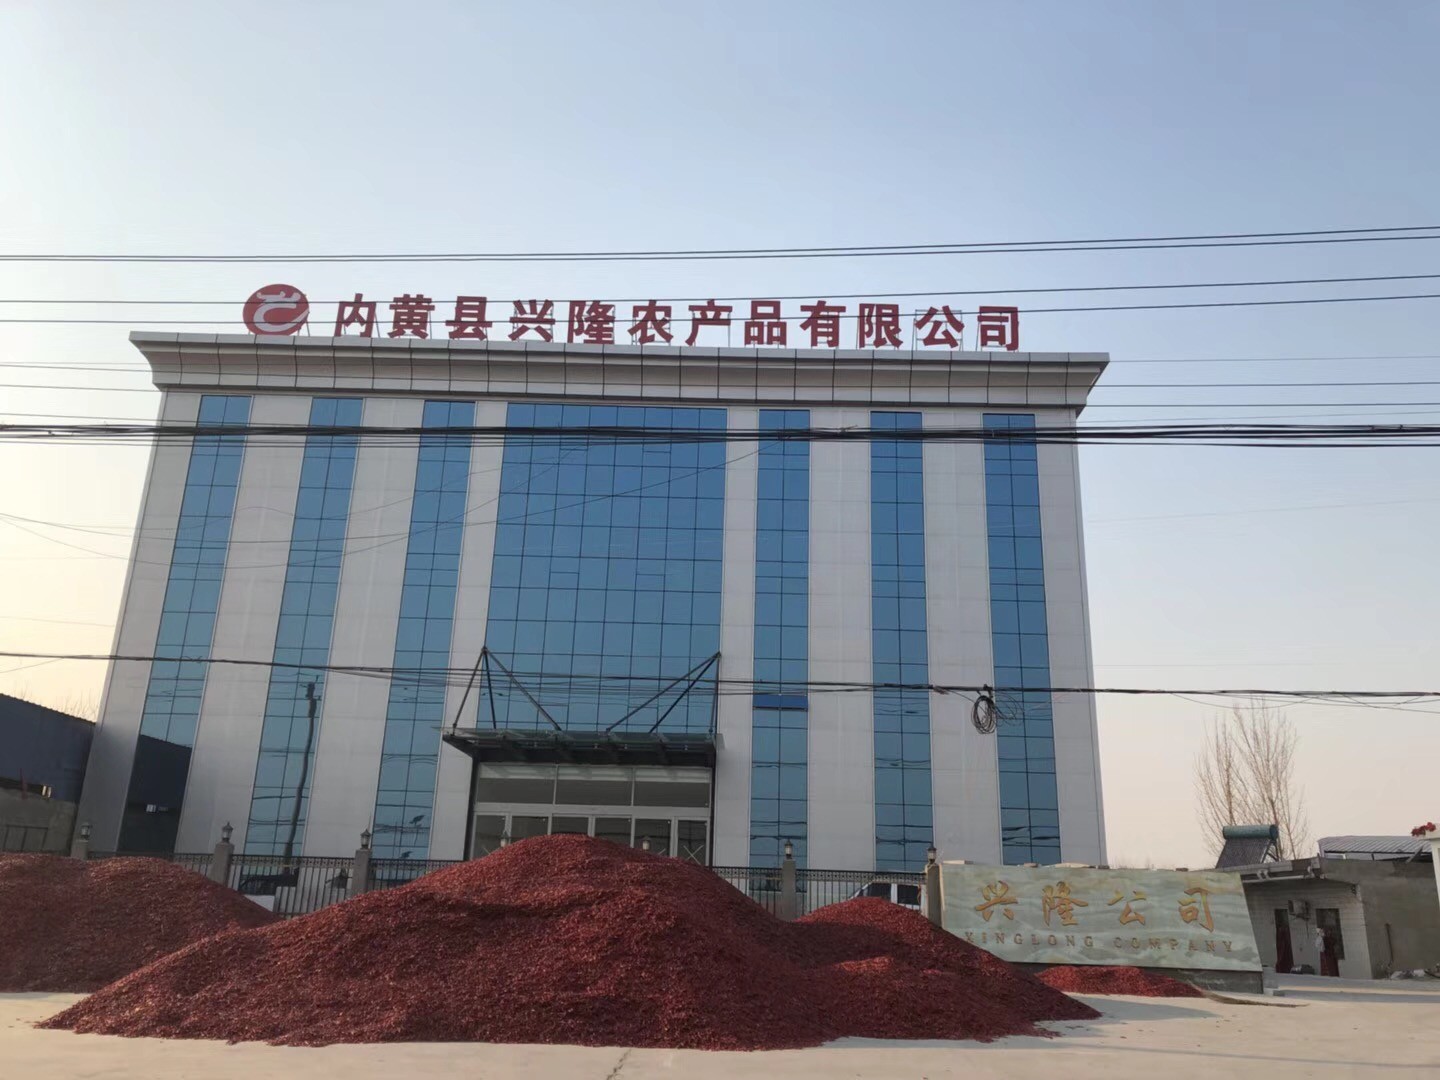 Chiny Neihuang Xinglong Agricultural Products Co. Ltd